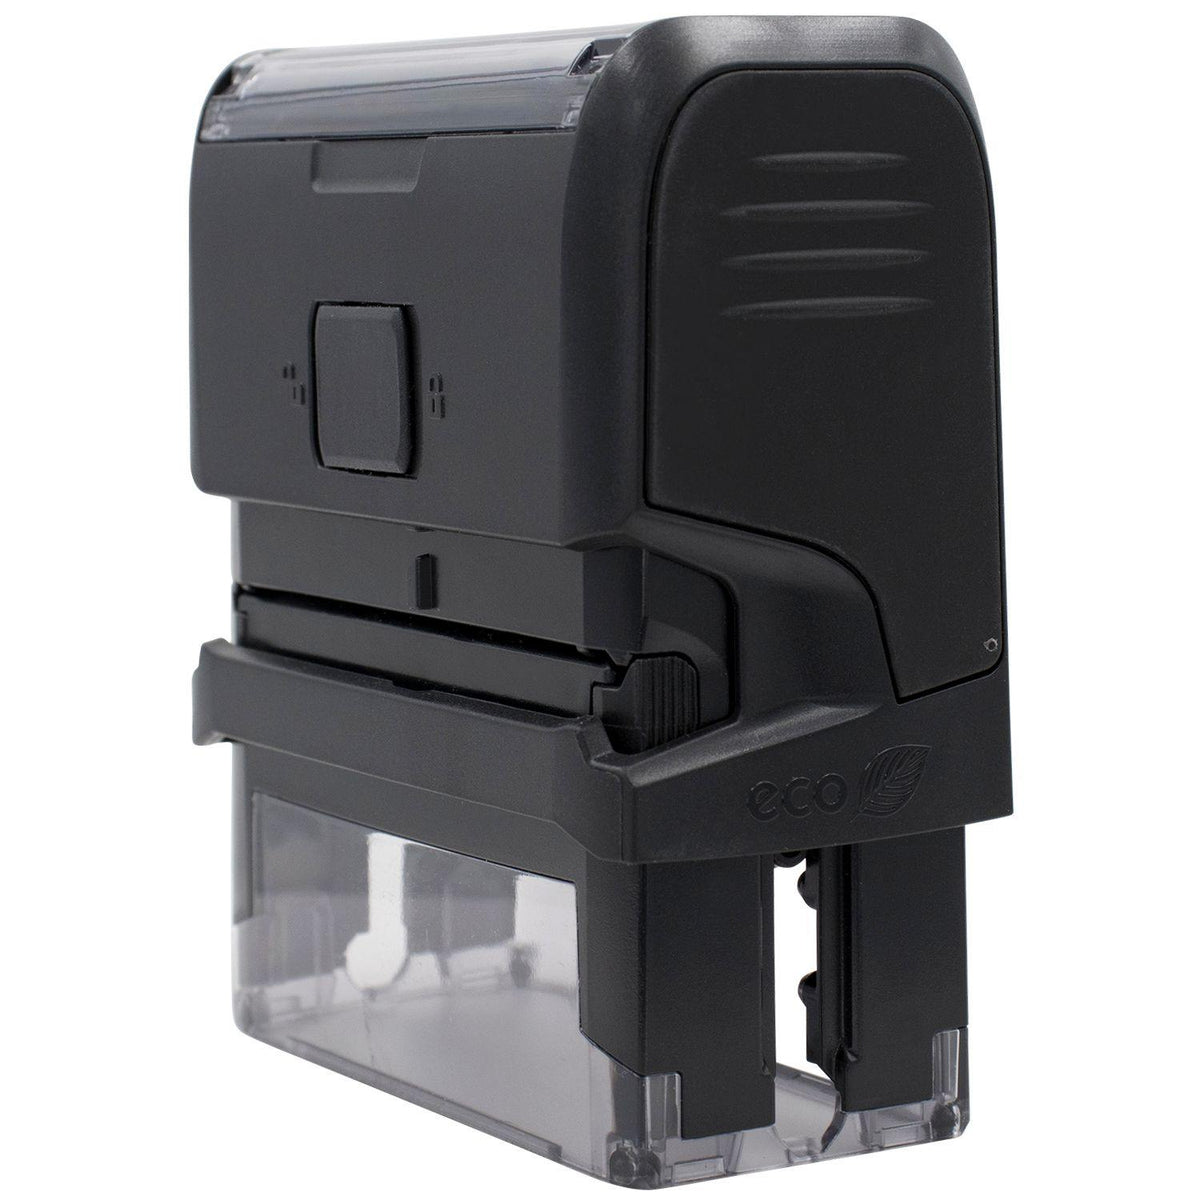 Self Inking Way To Go Stamp - Engineer Seal Stamps - Brand_Trodat, Impression Size_Small, Stamp Type_Self-Inking Stamp, Type of Use_Teacher